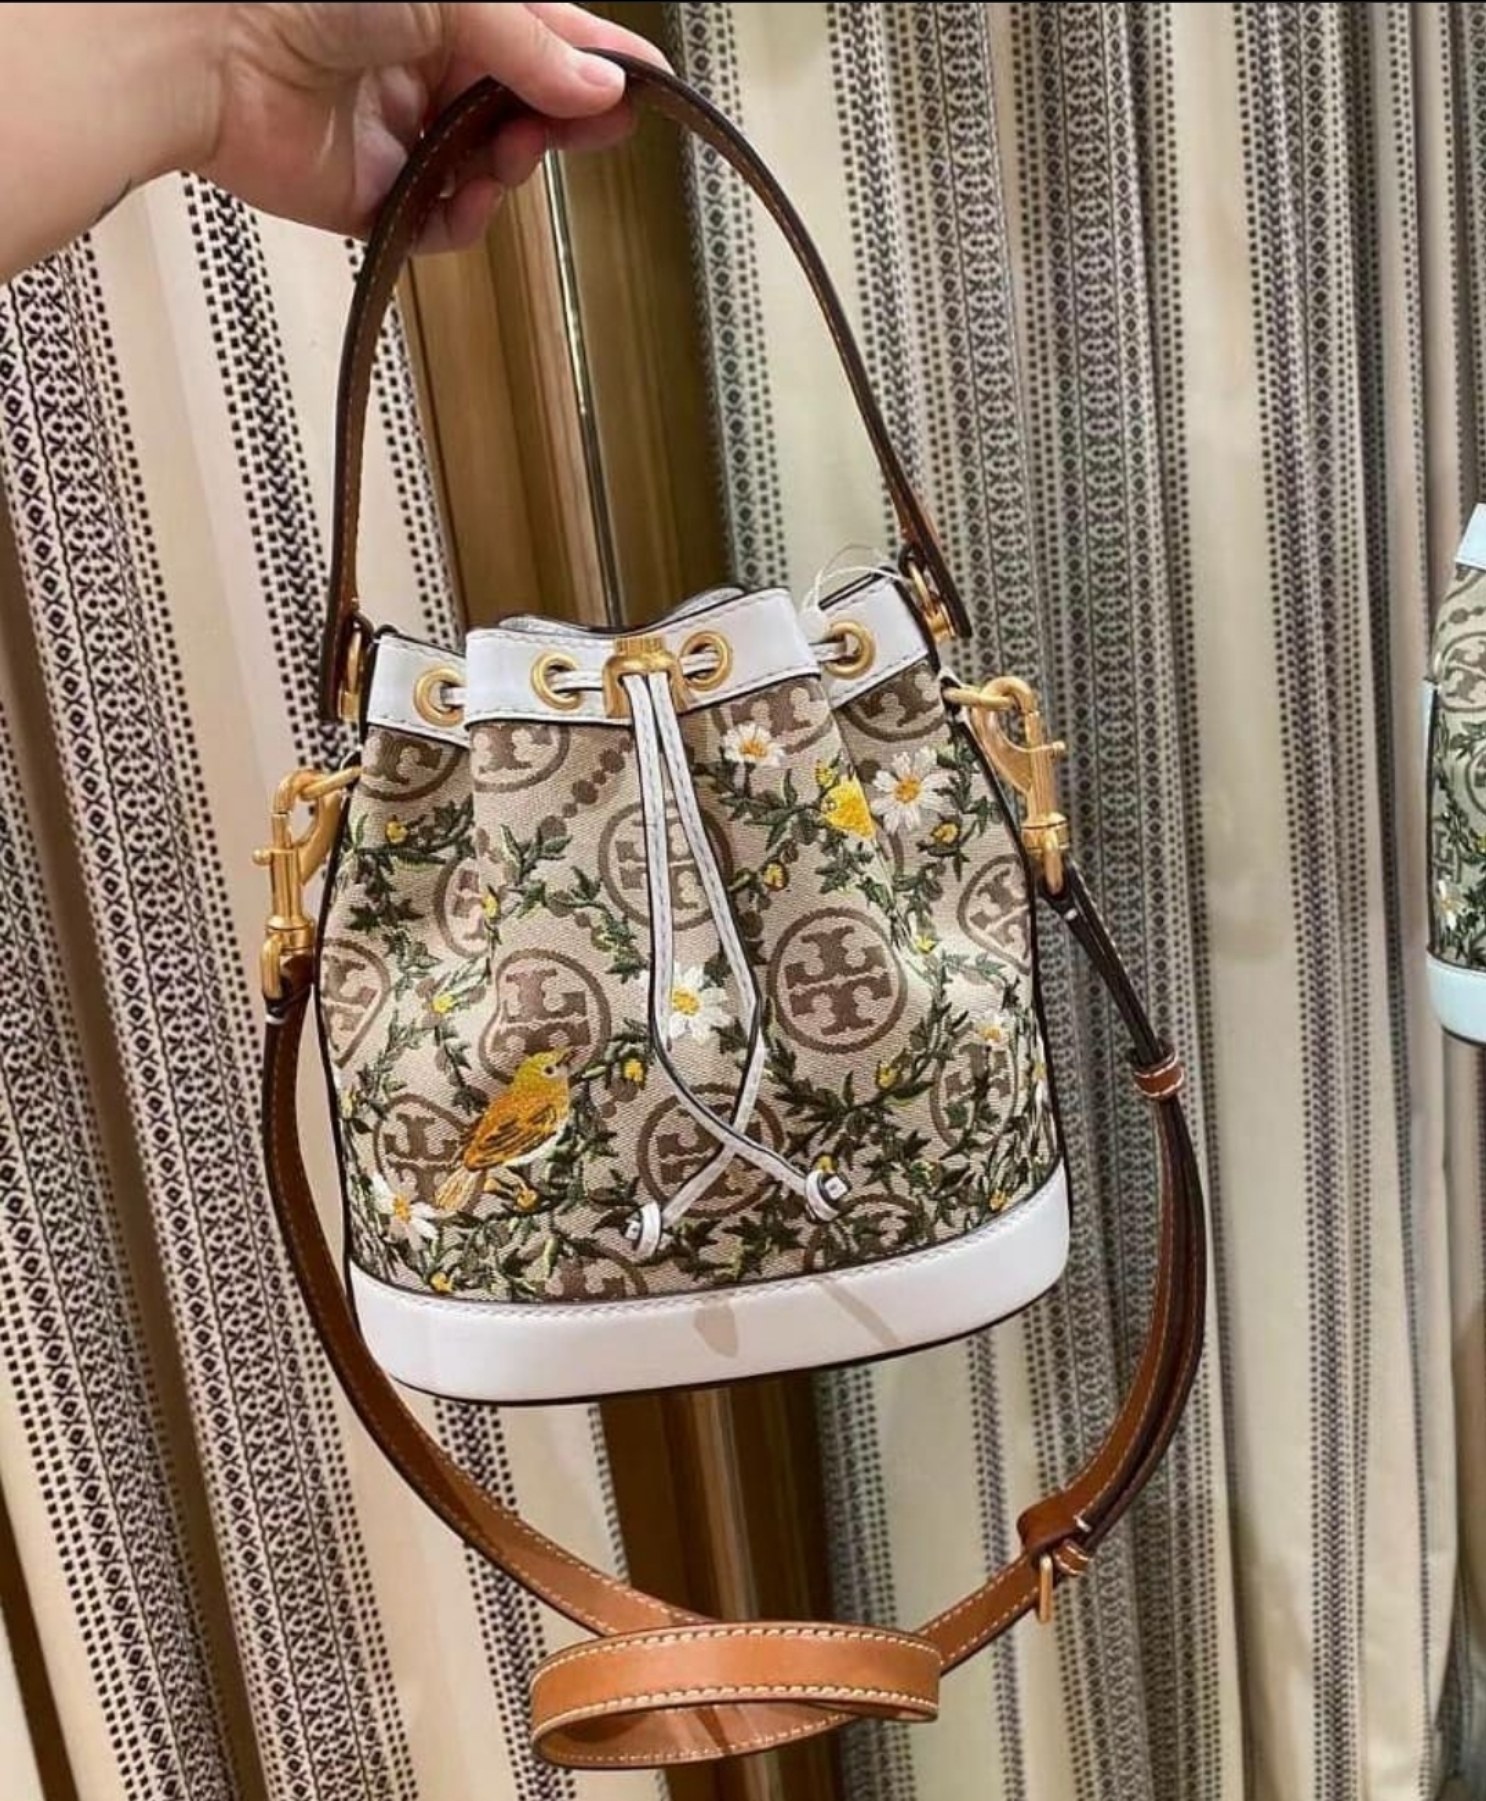 T.O.R.Y B.U.R.C.H 80862 T Monogram in Hazel / Gardenia Woven Jacquard  Embroidered with Fine Leather Trim Zip Camera Bag - Women's Bag